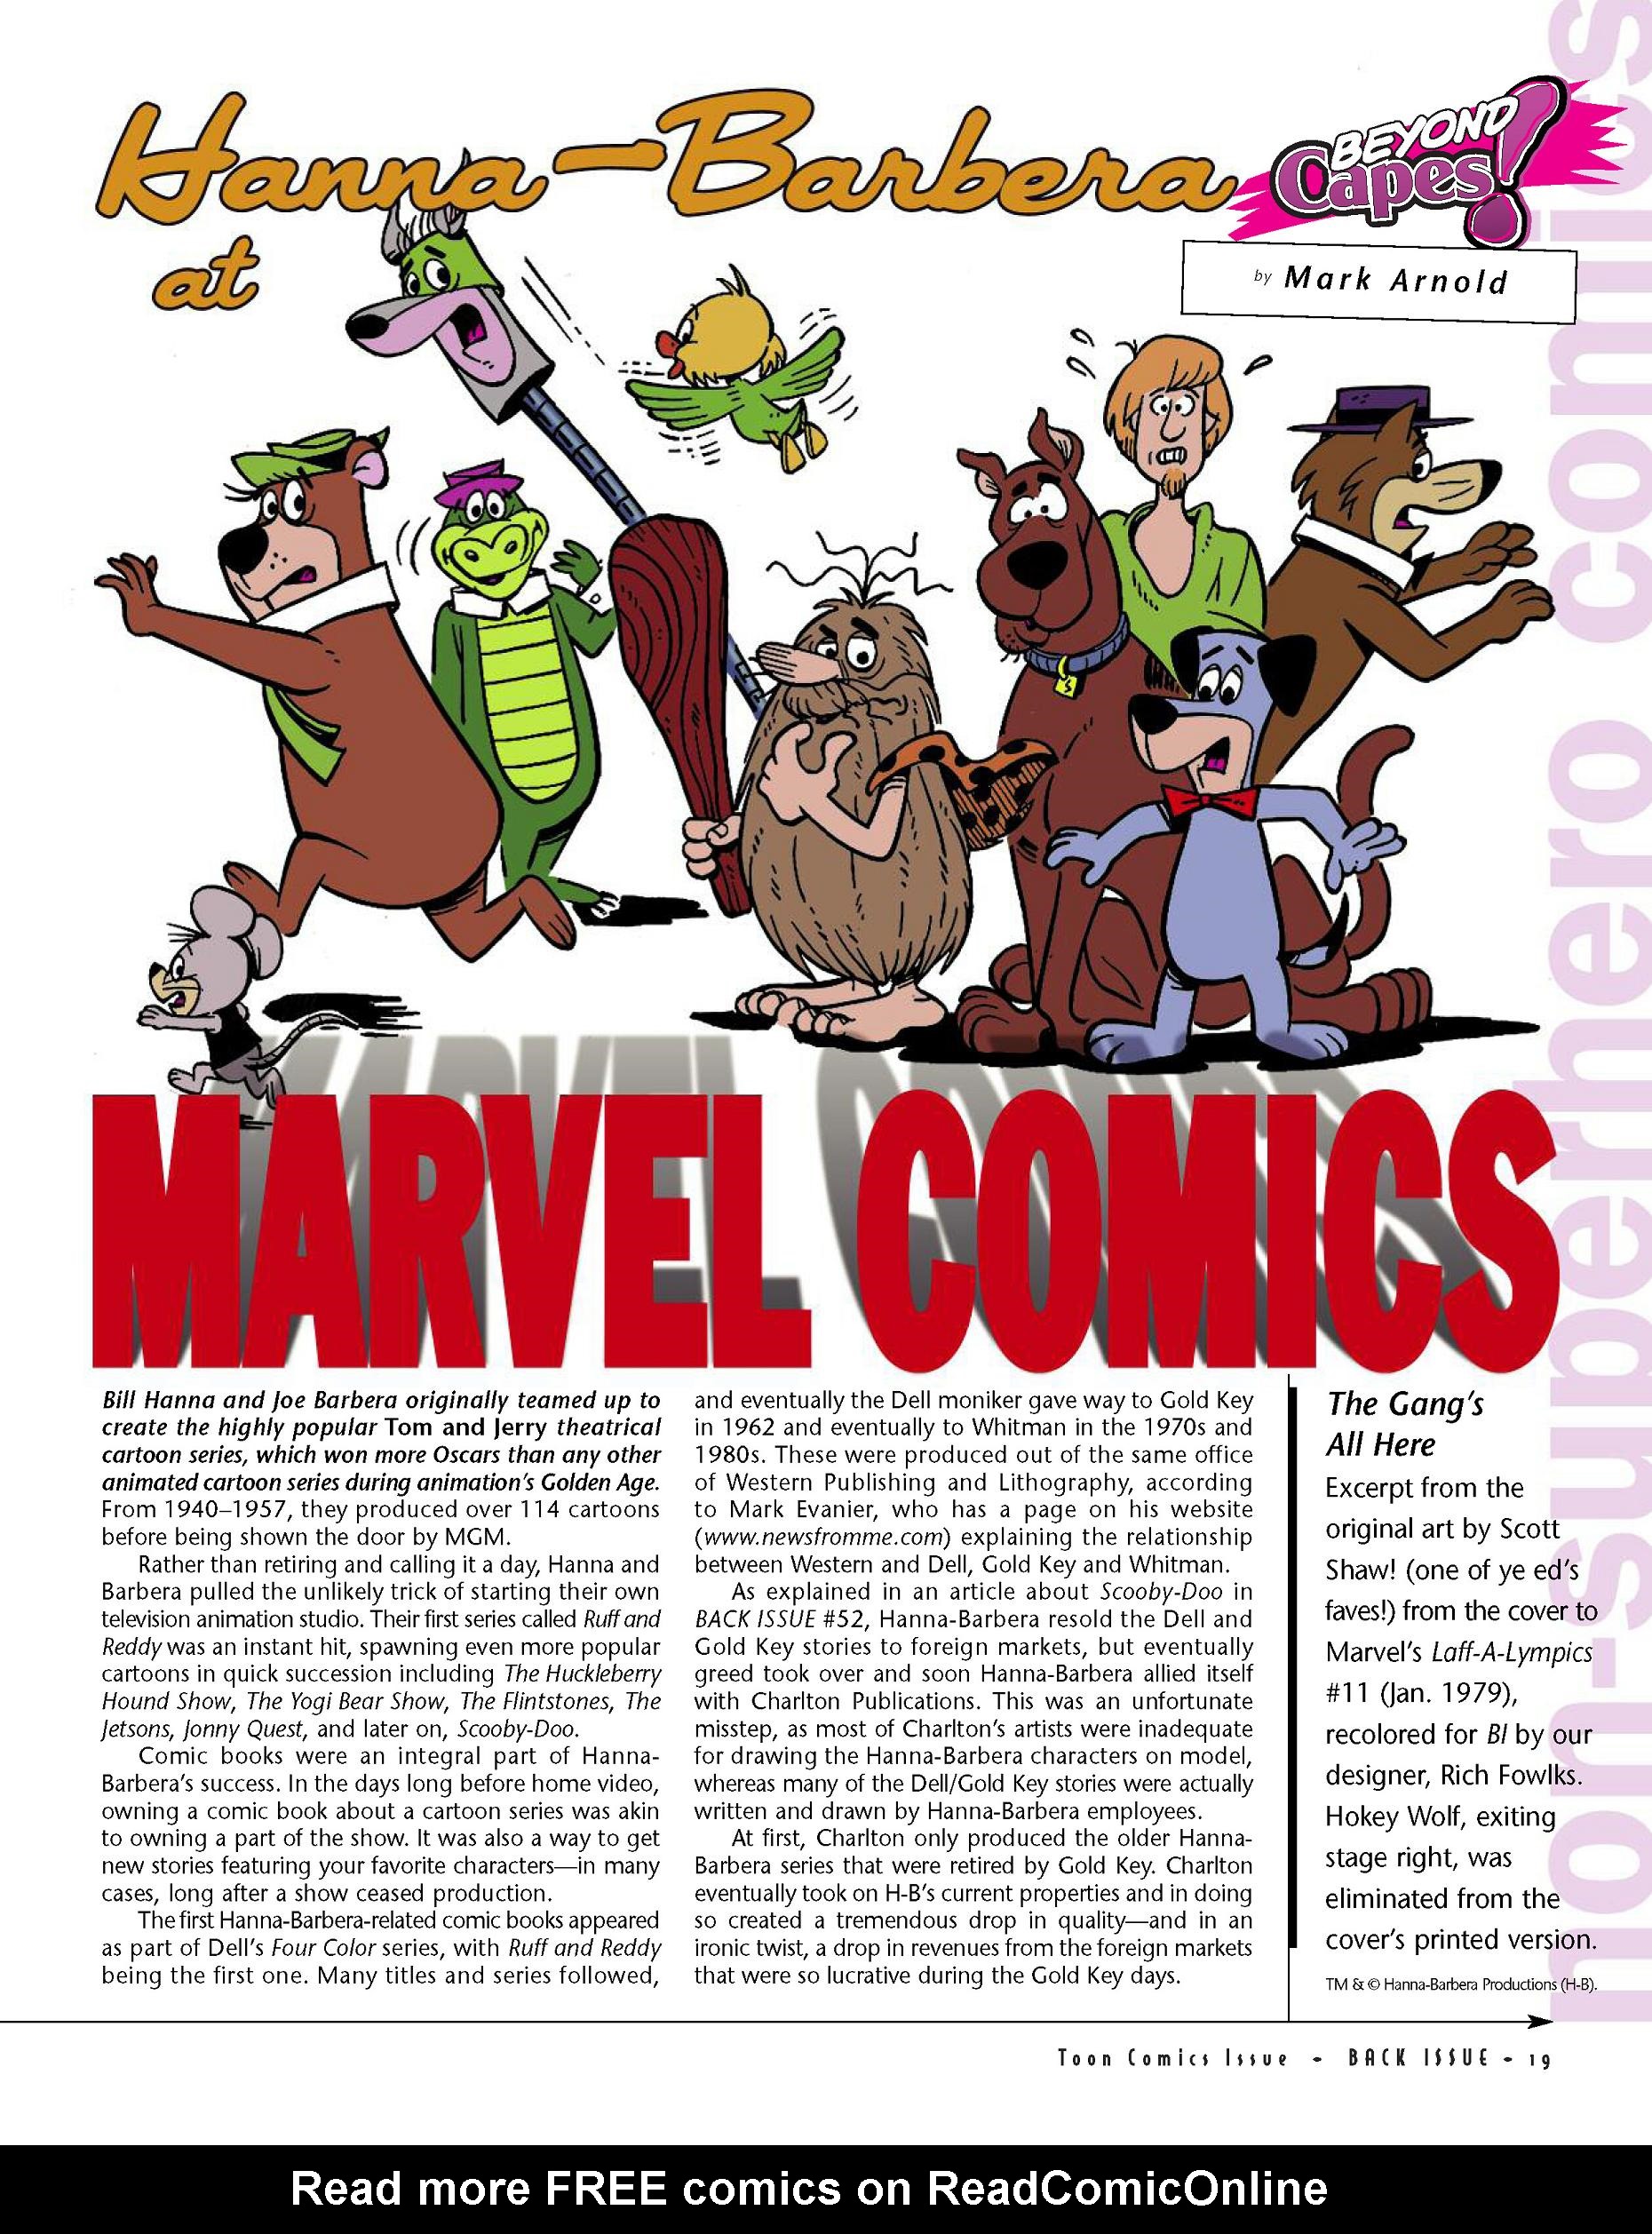 Read online Back Issue comic -  Issue #59 - 20